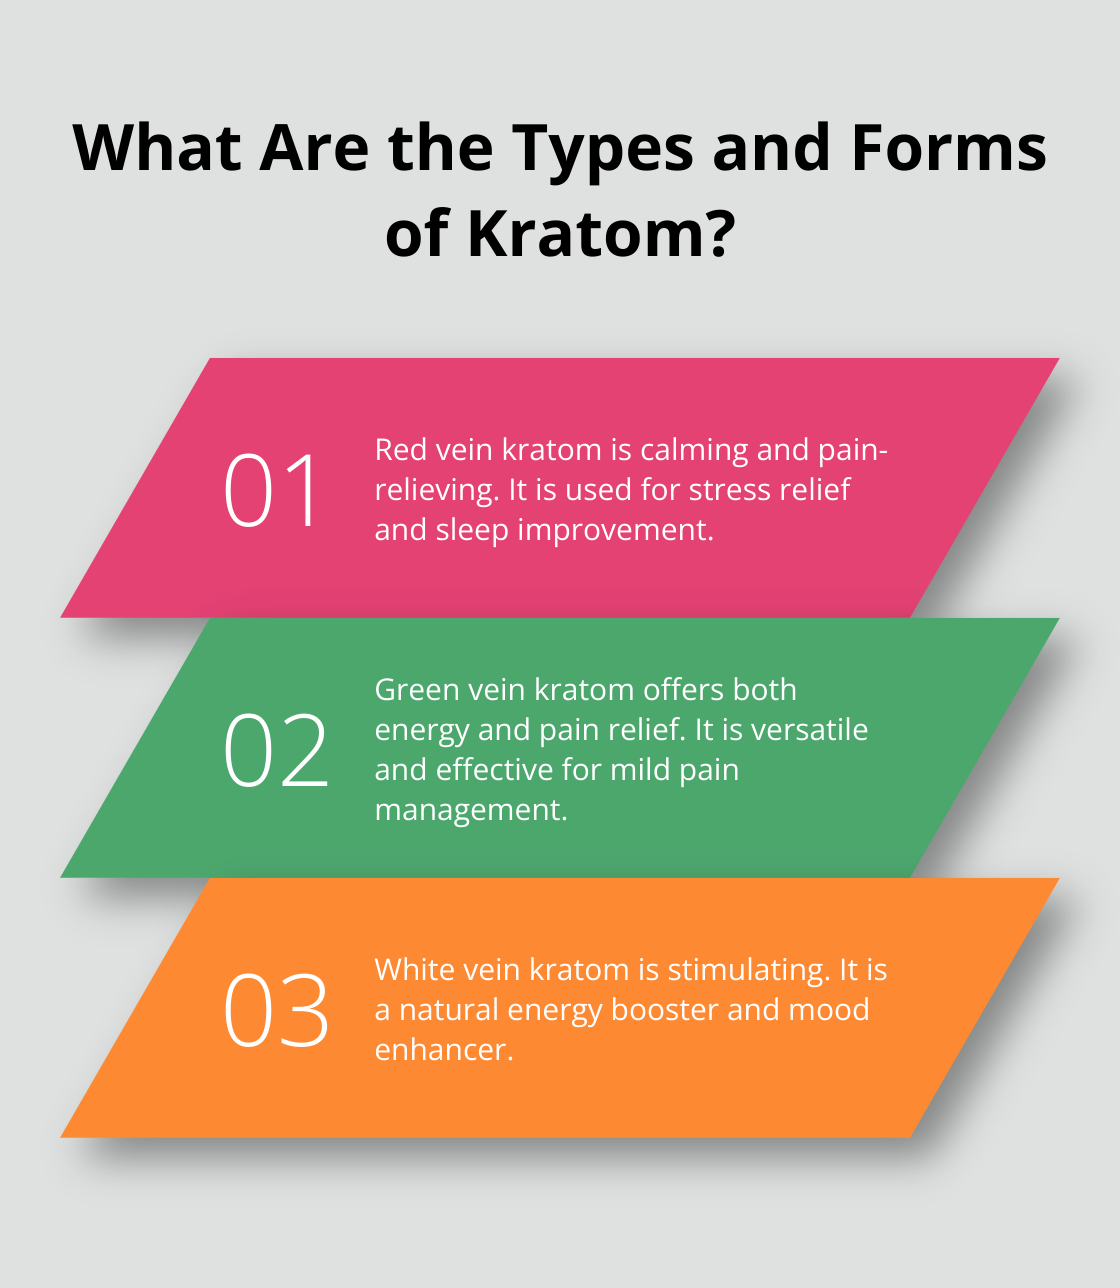 Fact - What Are the Types and Forms of Kratom?